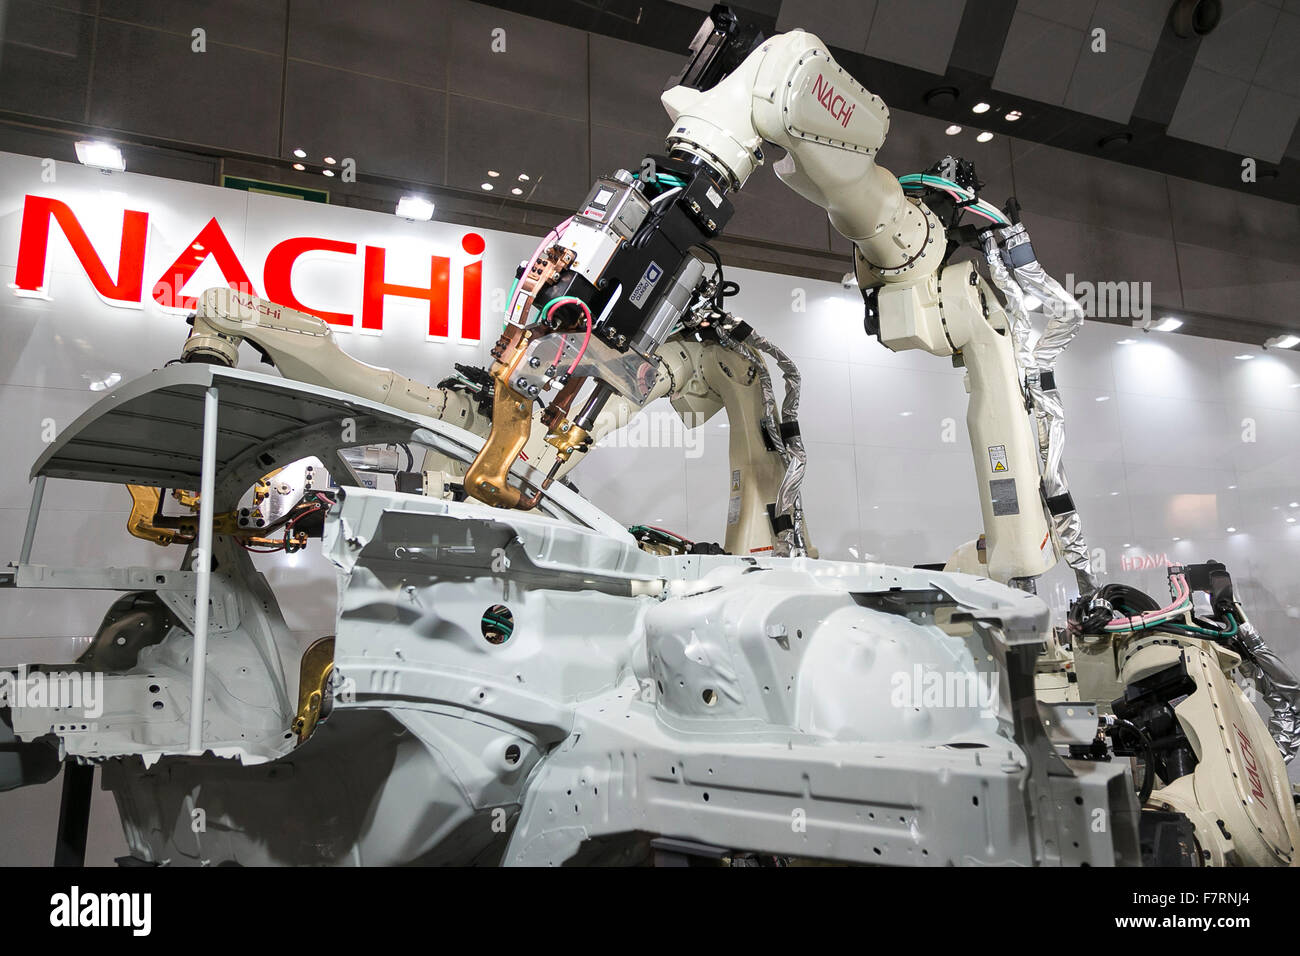 NACHI's industrial robots perform at the International Robot Exhibition 2015 on 2, 2015, Tokyo, 446 companies and organisations (from Japan and overseas) showed off new robots equipment Service